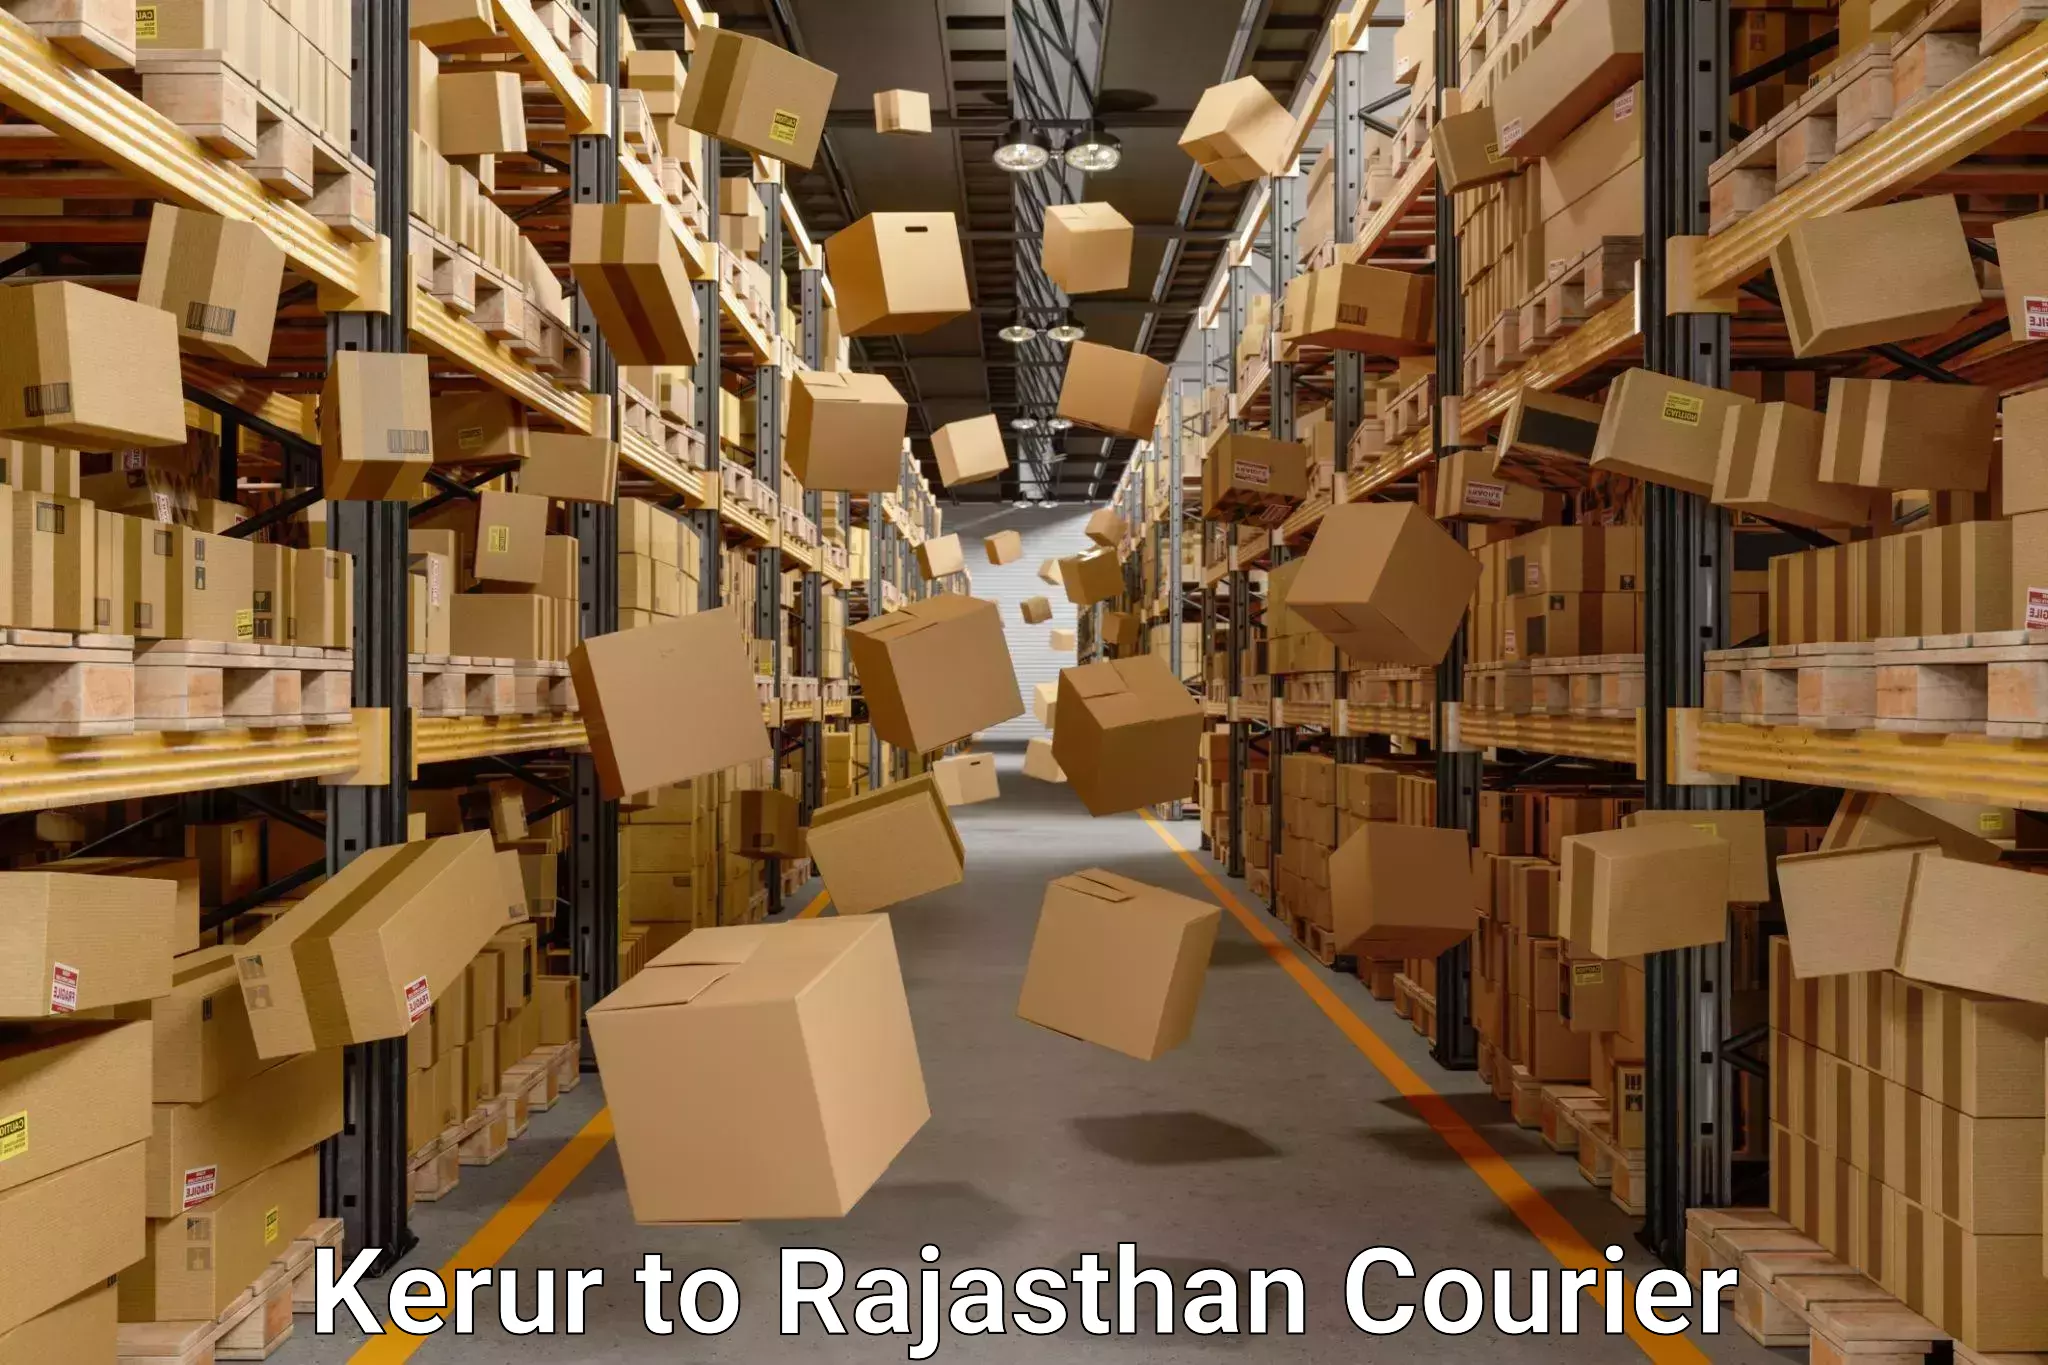 Professional moving assistance in Kerur to Rajasthan